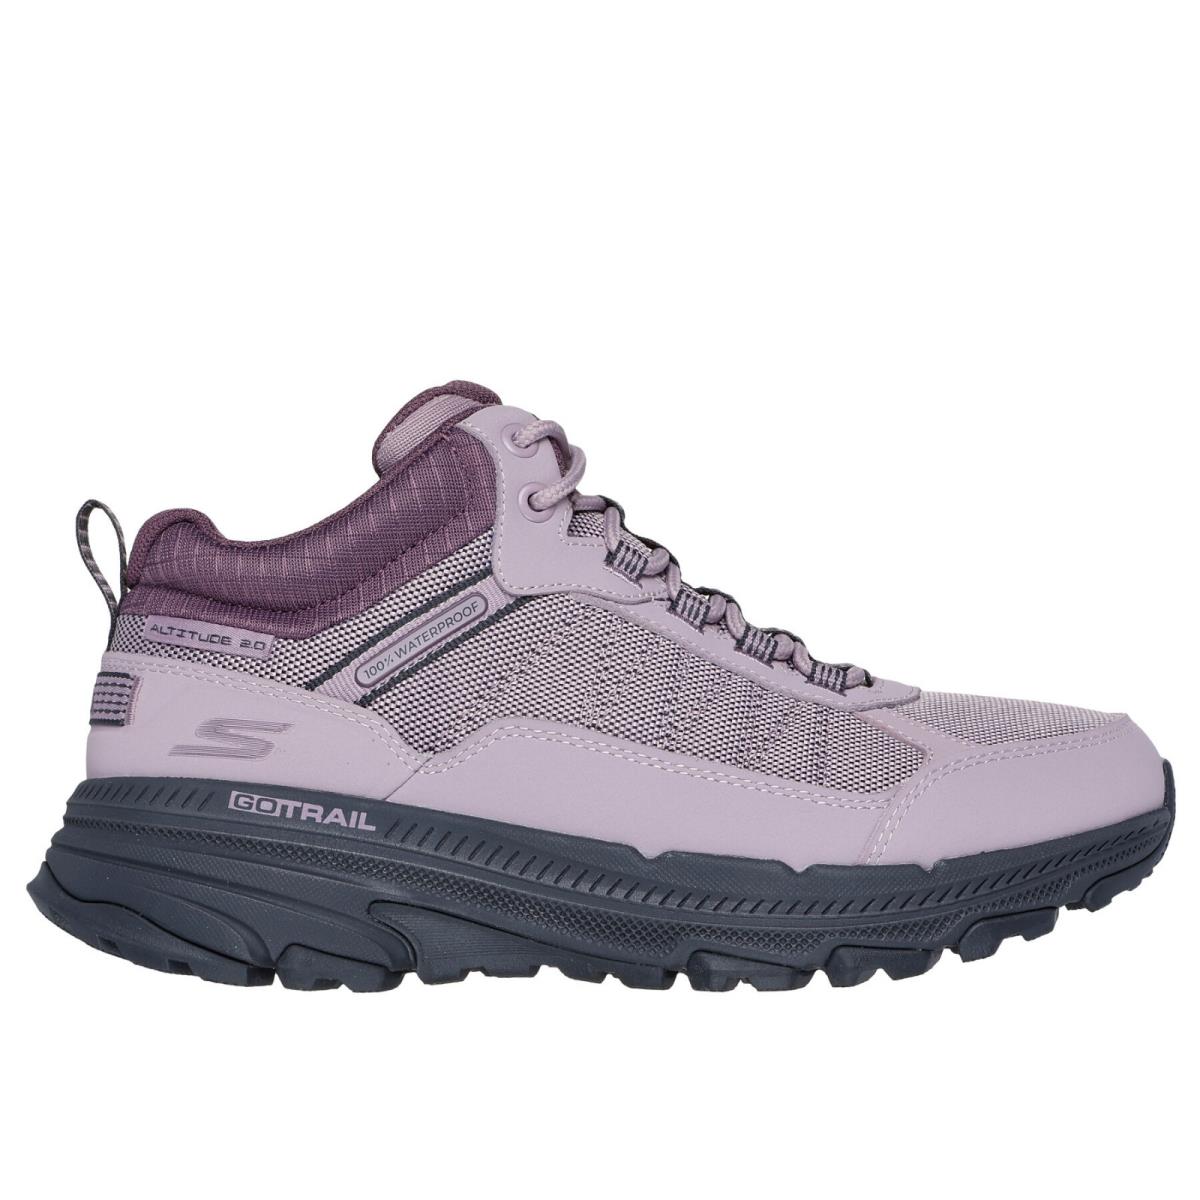 Womens Skechers GO Run Trail Altitude 2.0 Mauve Leather Shoes - Pink